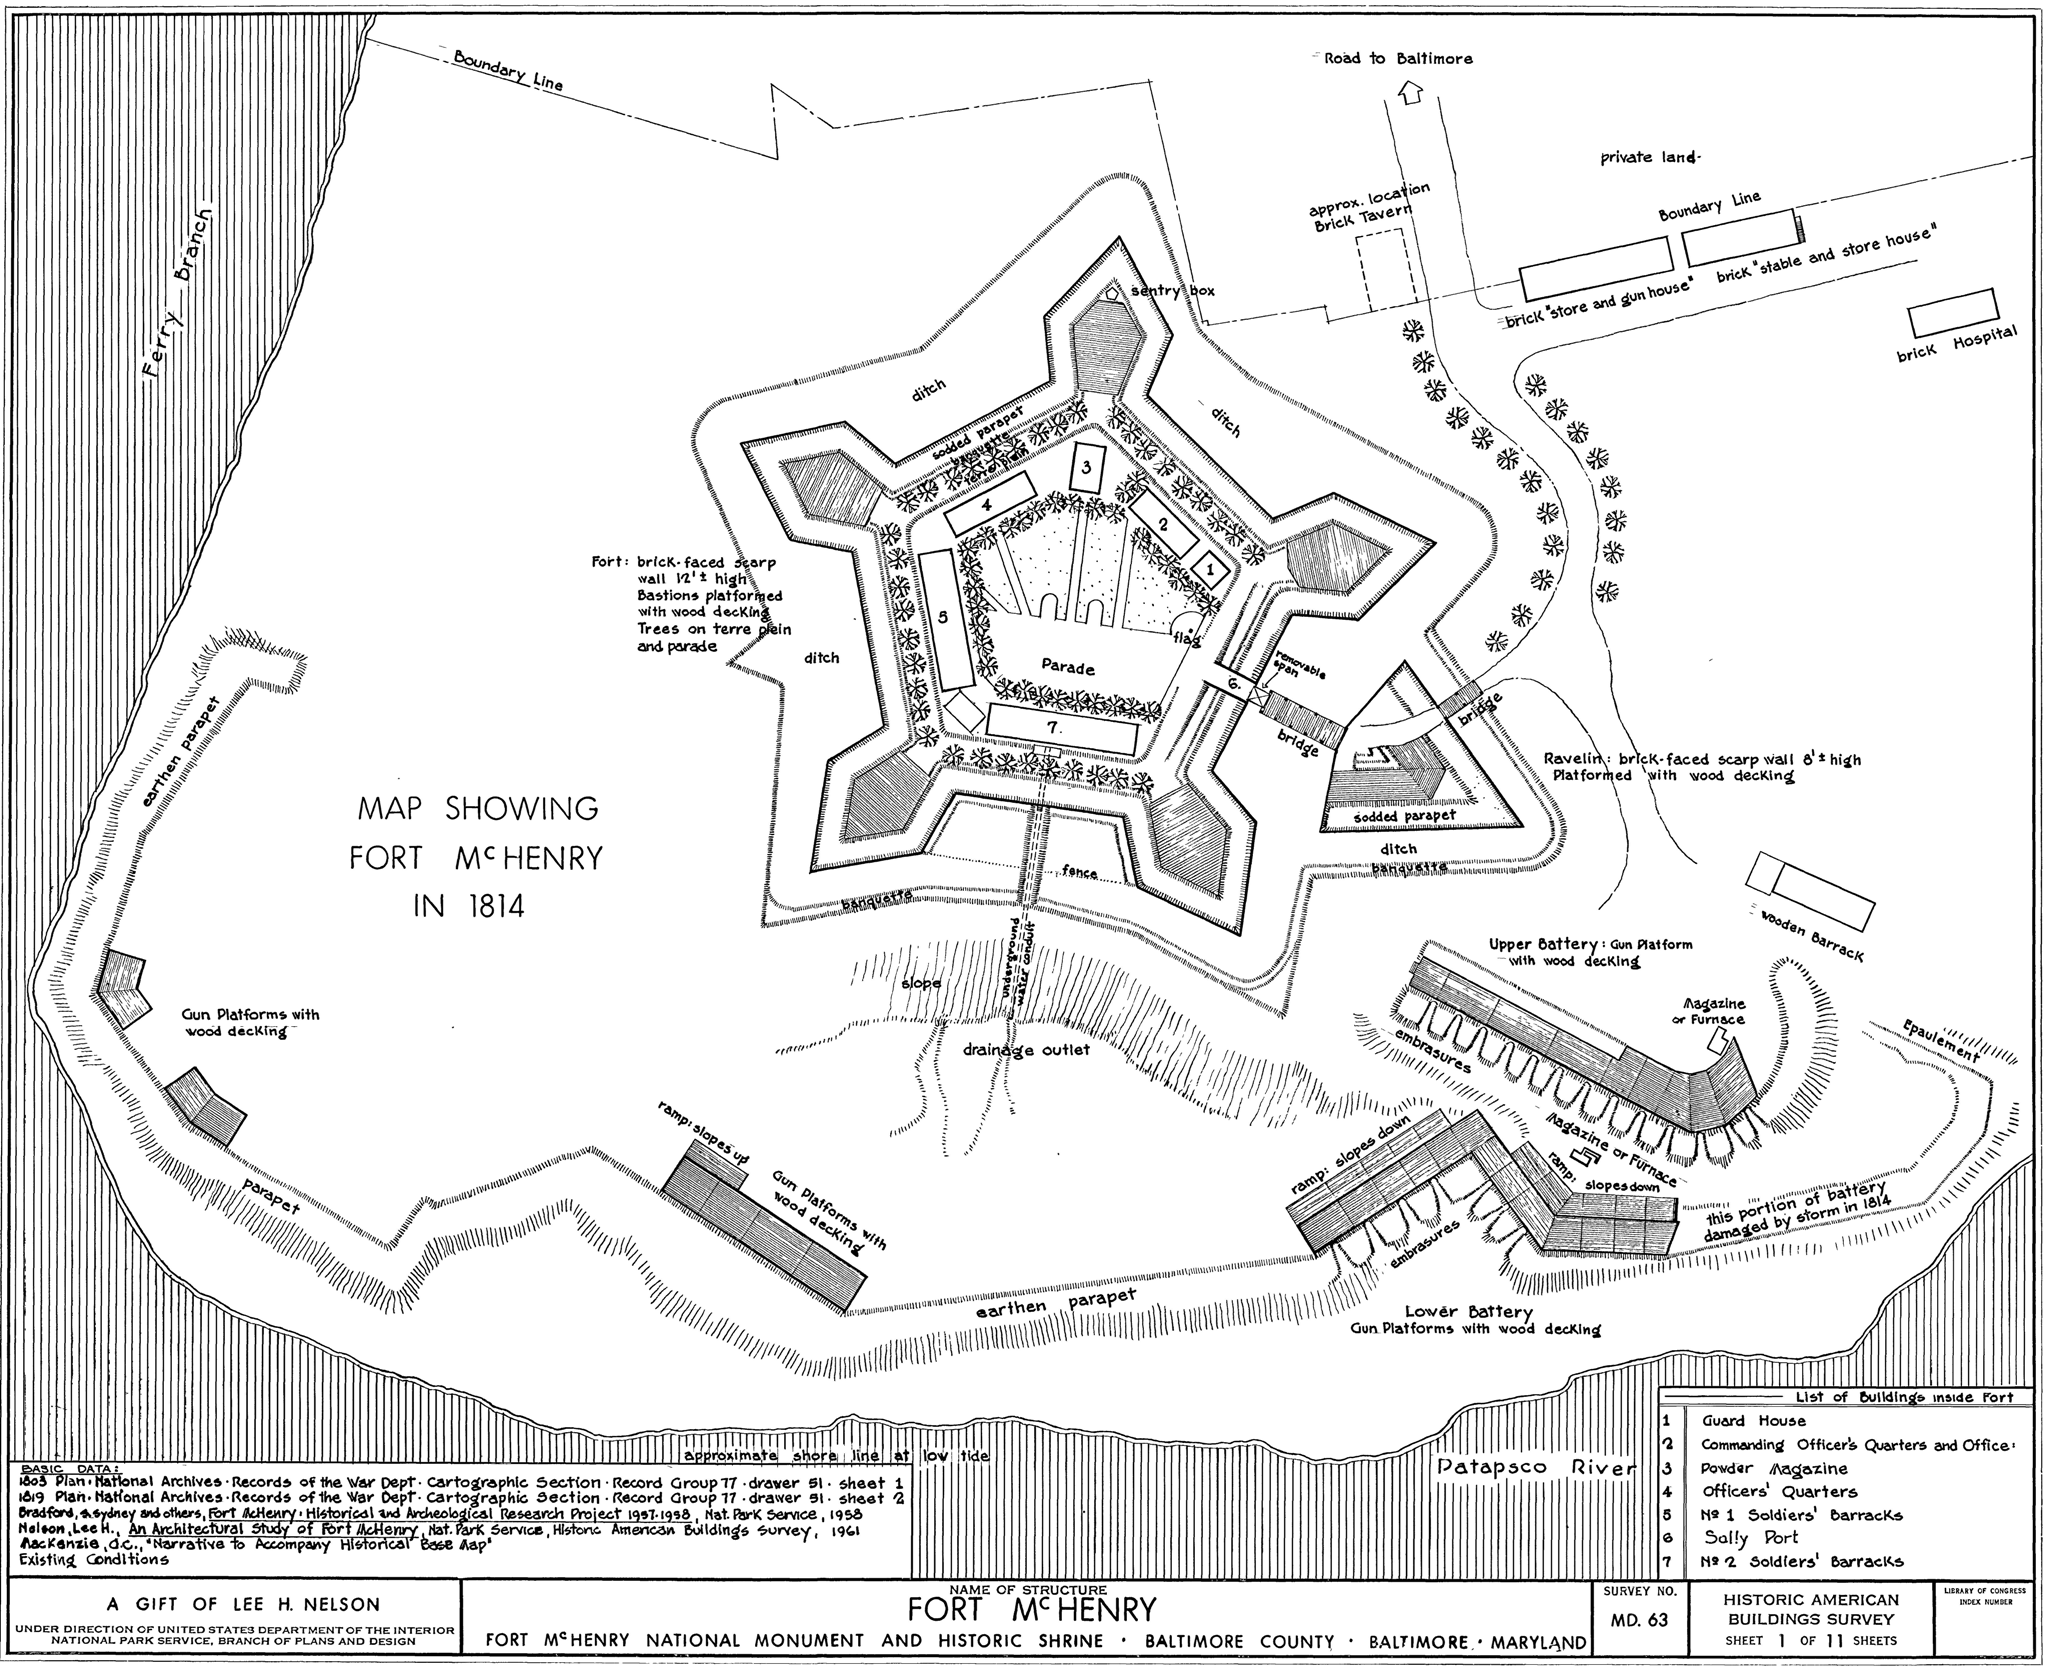 Map Showing Fort McHenry in 1814